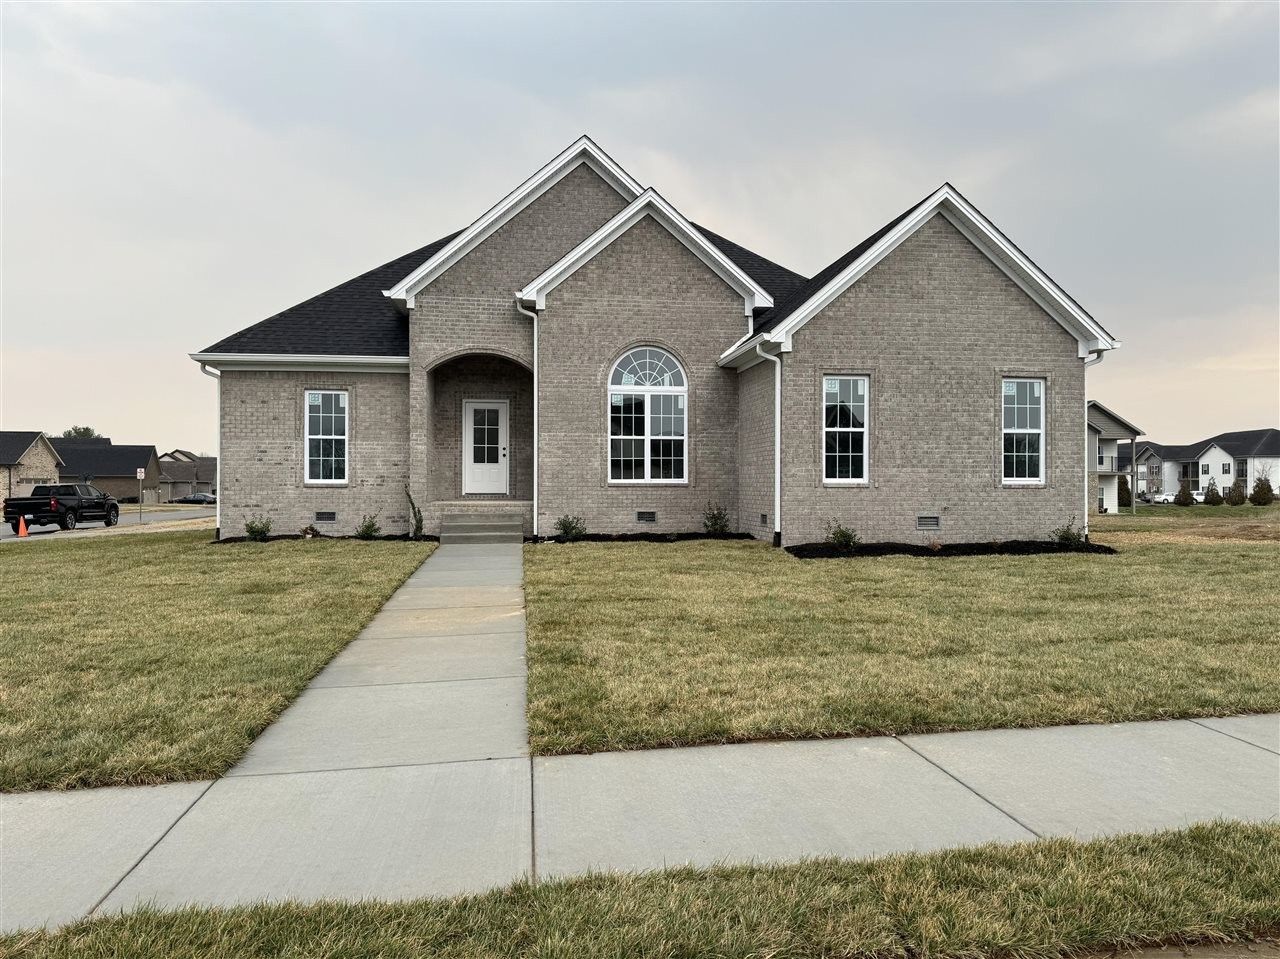 8779 Bale Twine Court. Bowling Green, KY 42104